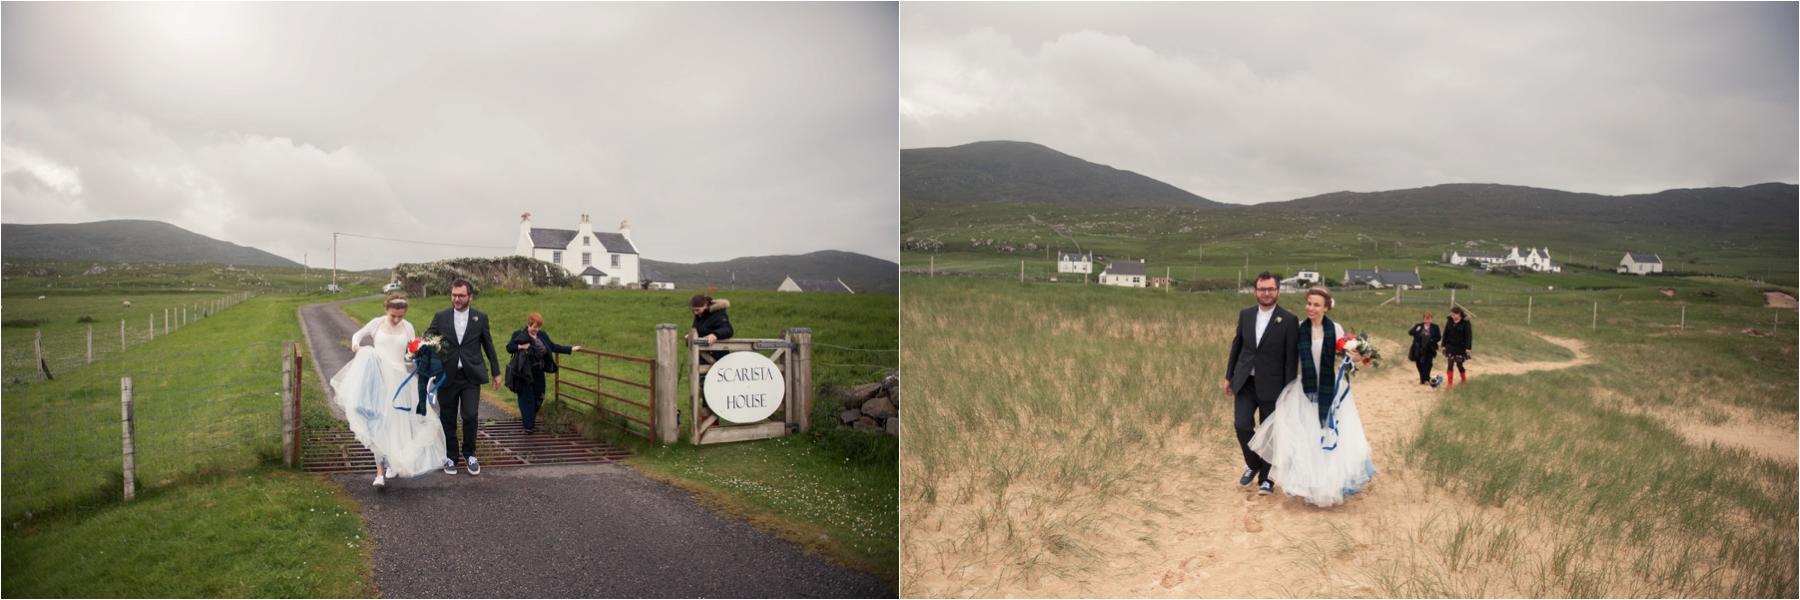 A bride and groom walk from Scarista House on the Isle of Harris to their wedding ceremony on Scarista Beach.